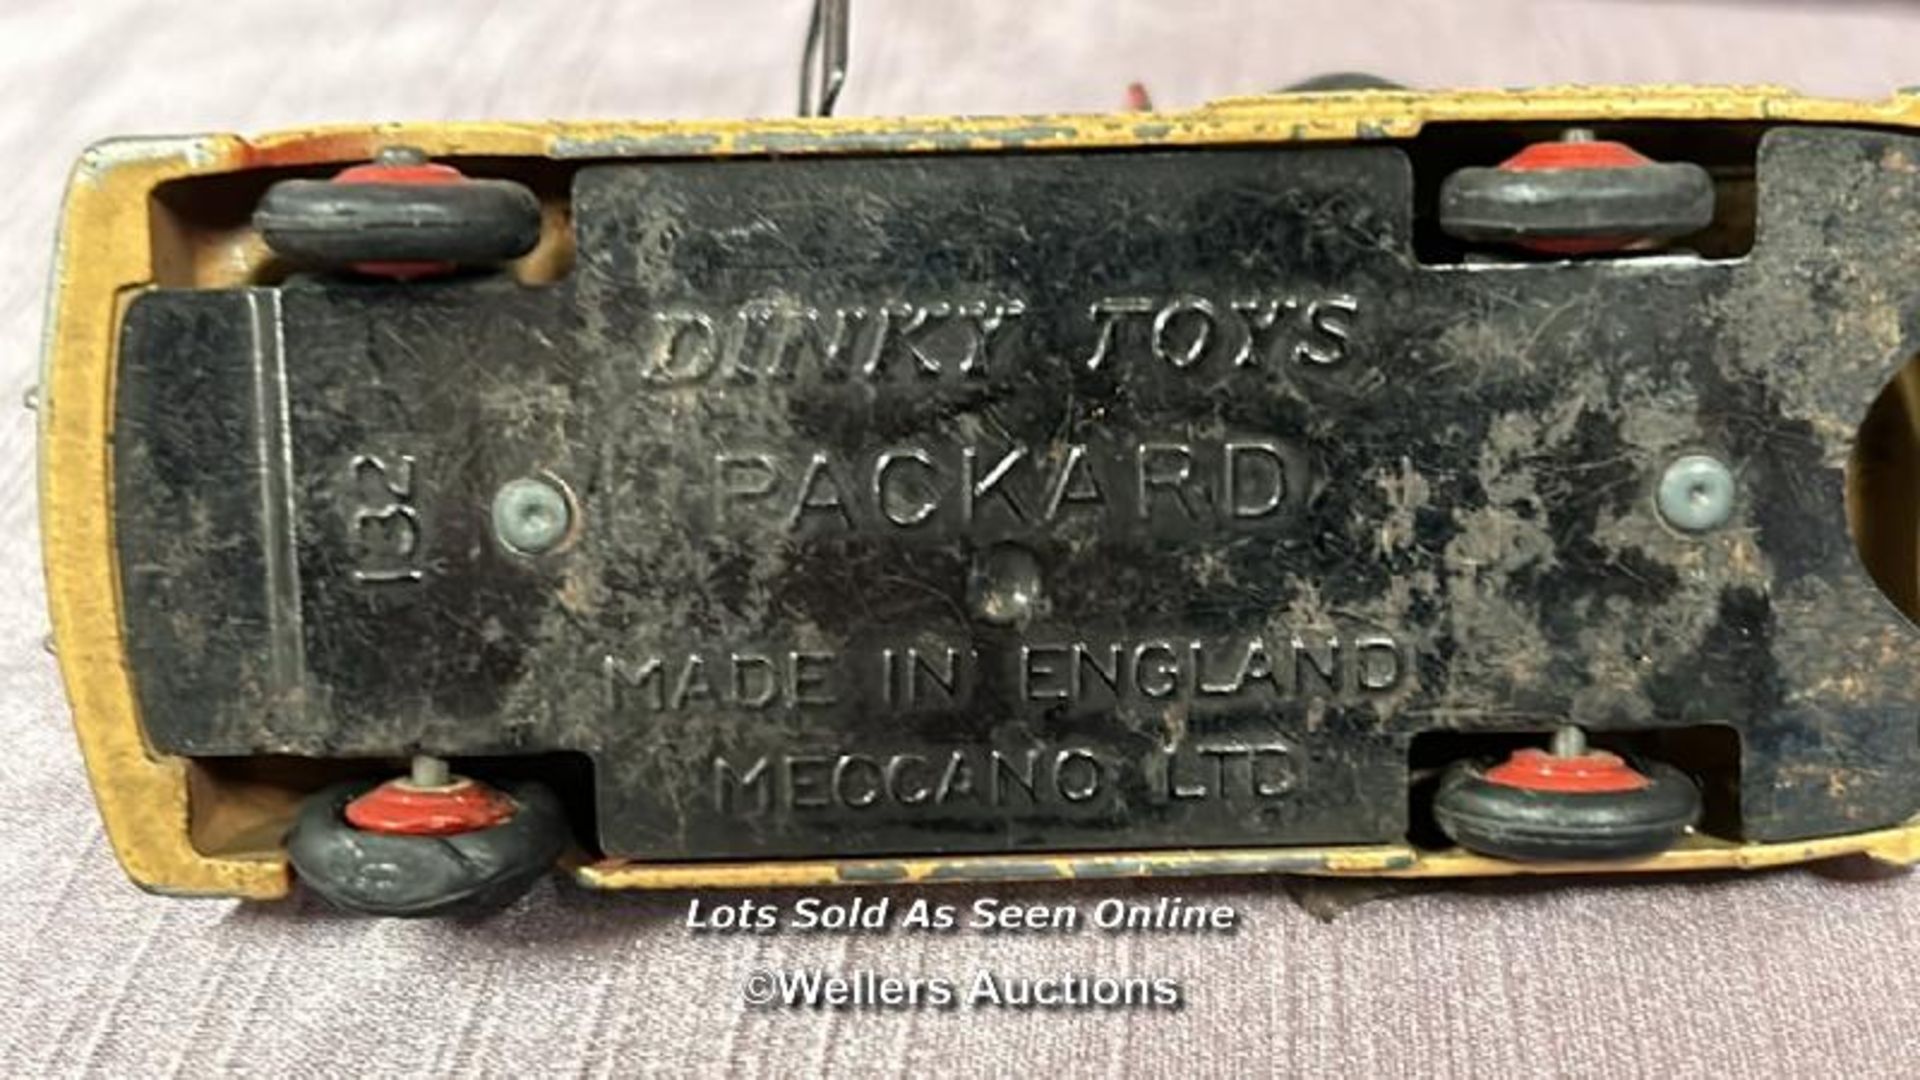 TWO DINKY DIE CAST CARS INCLUDING PACKARD NO. 132 AND JEEP NO. 25Y - Image 4 of 7